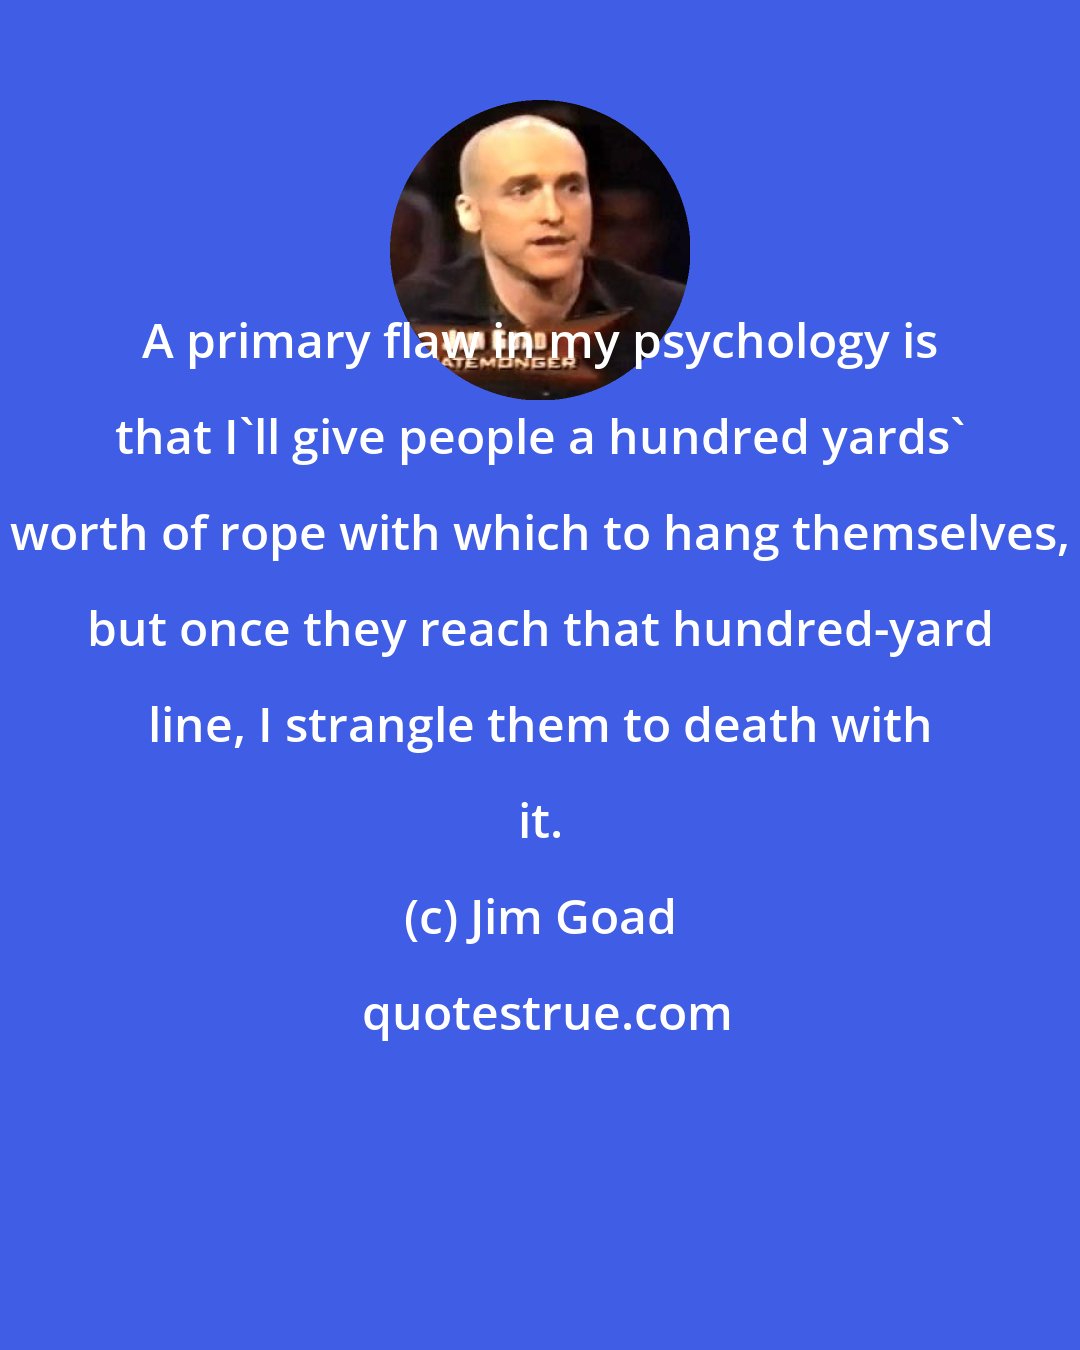 Jim Goad: A primary flaw in my psychology is that I'll give people a hundred yards' worth of rope with which to hang themselves, but once they reach that hundred-yard line, I strangle them to death with it.